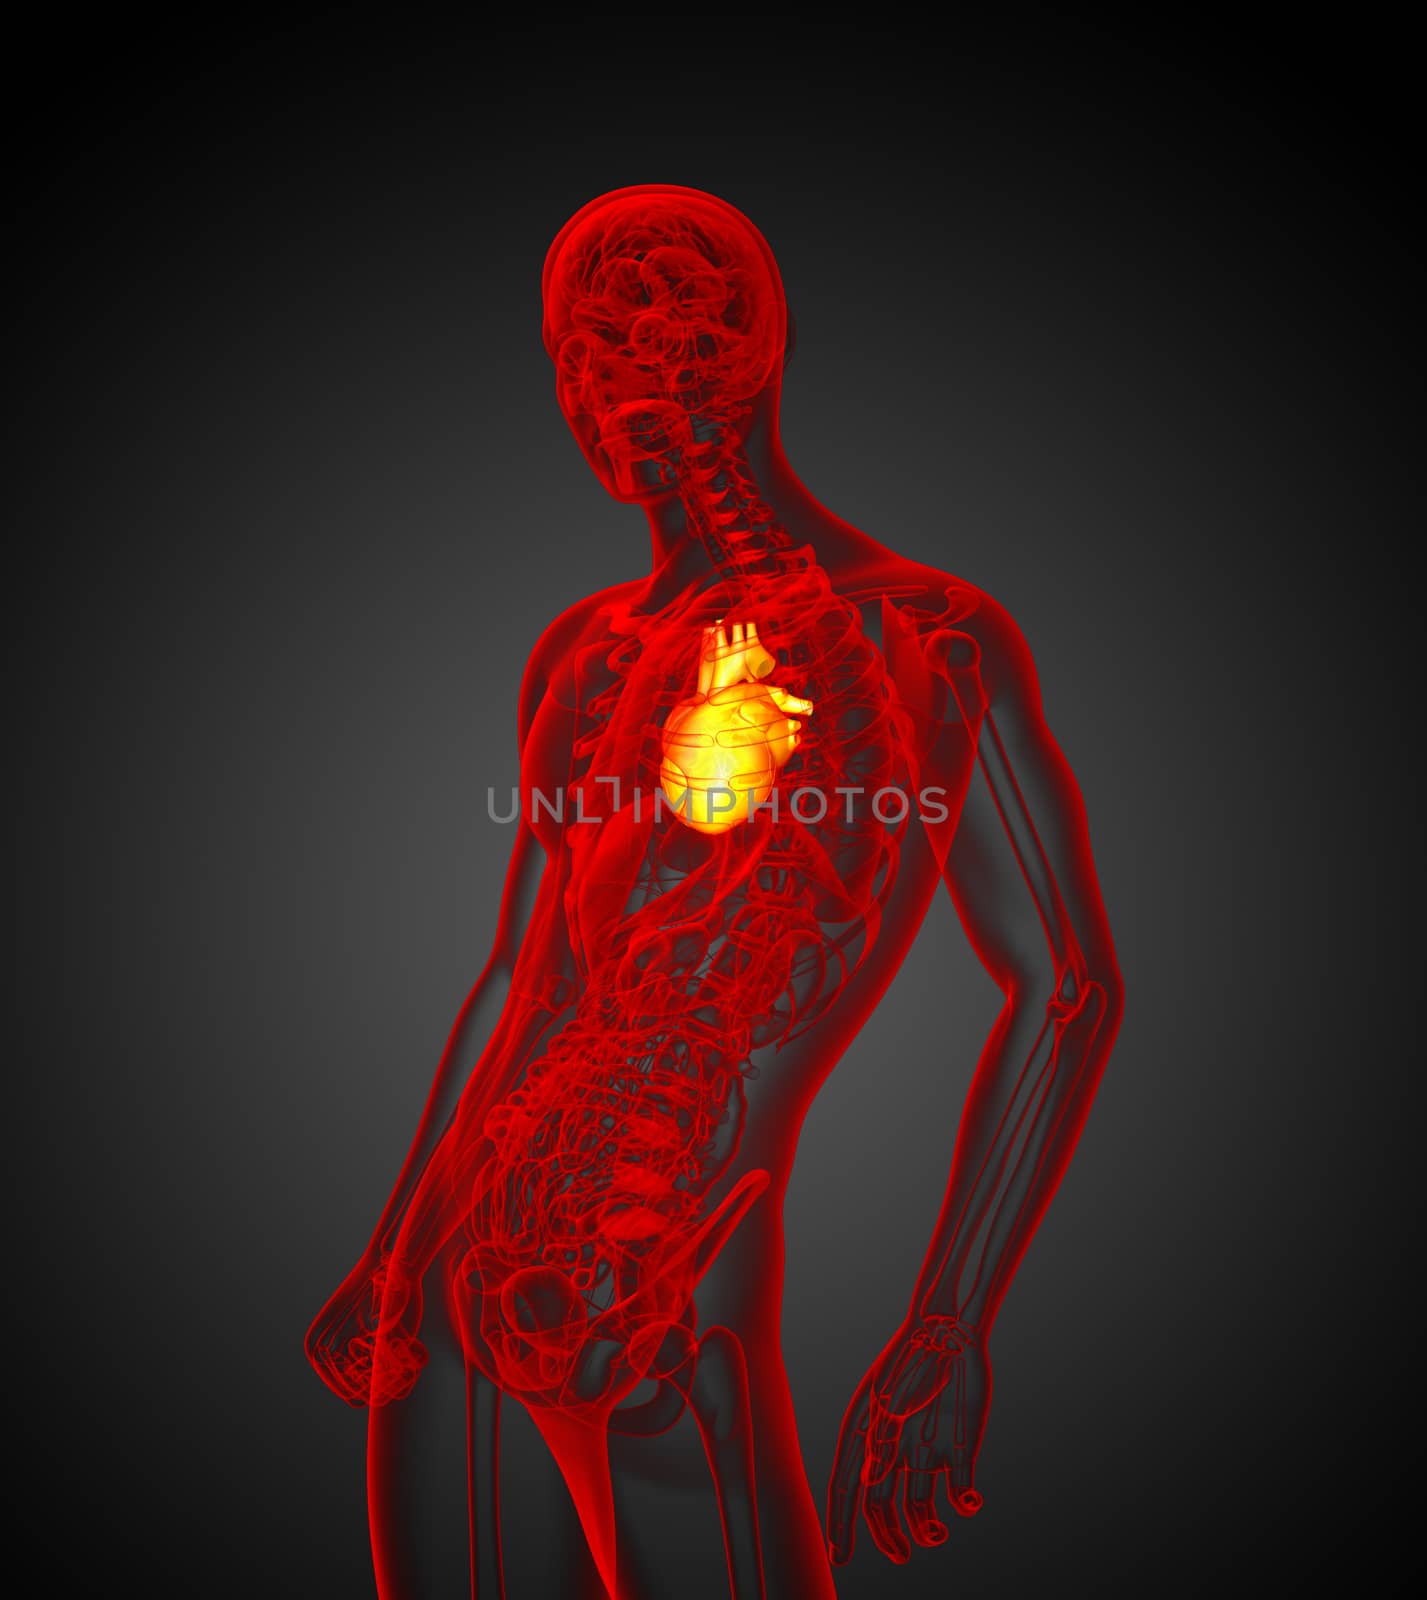 3d render medical illustration of the human heart by maya2008